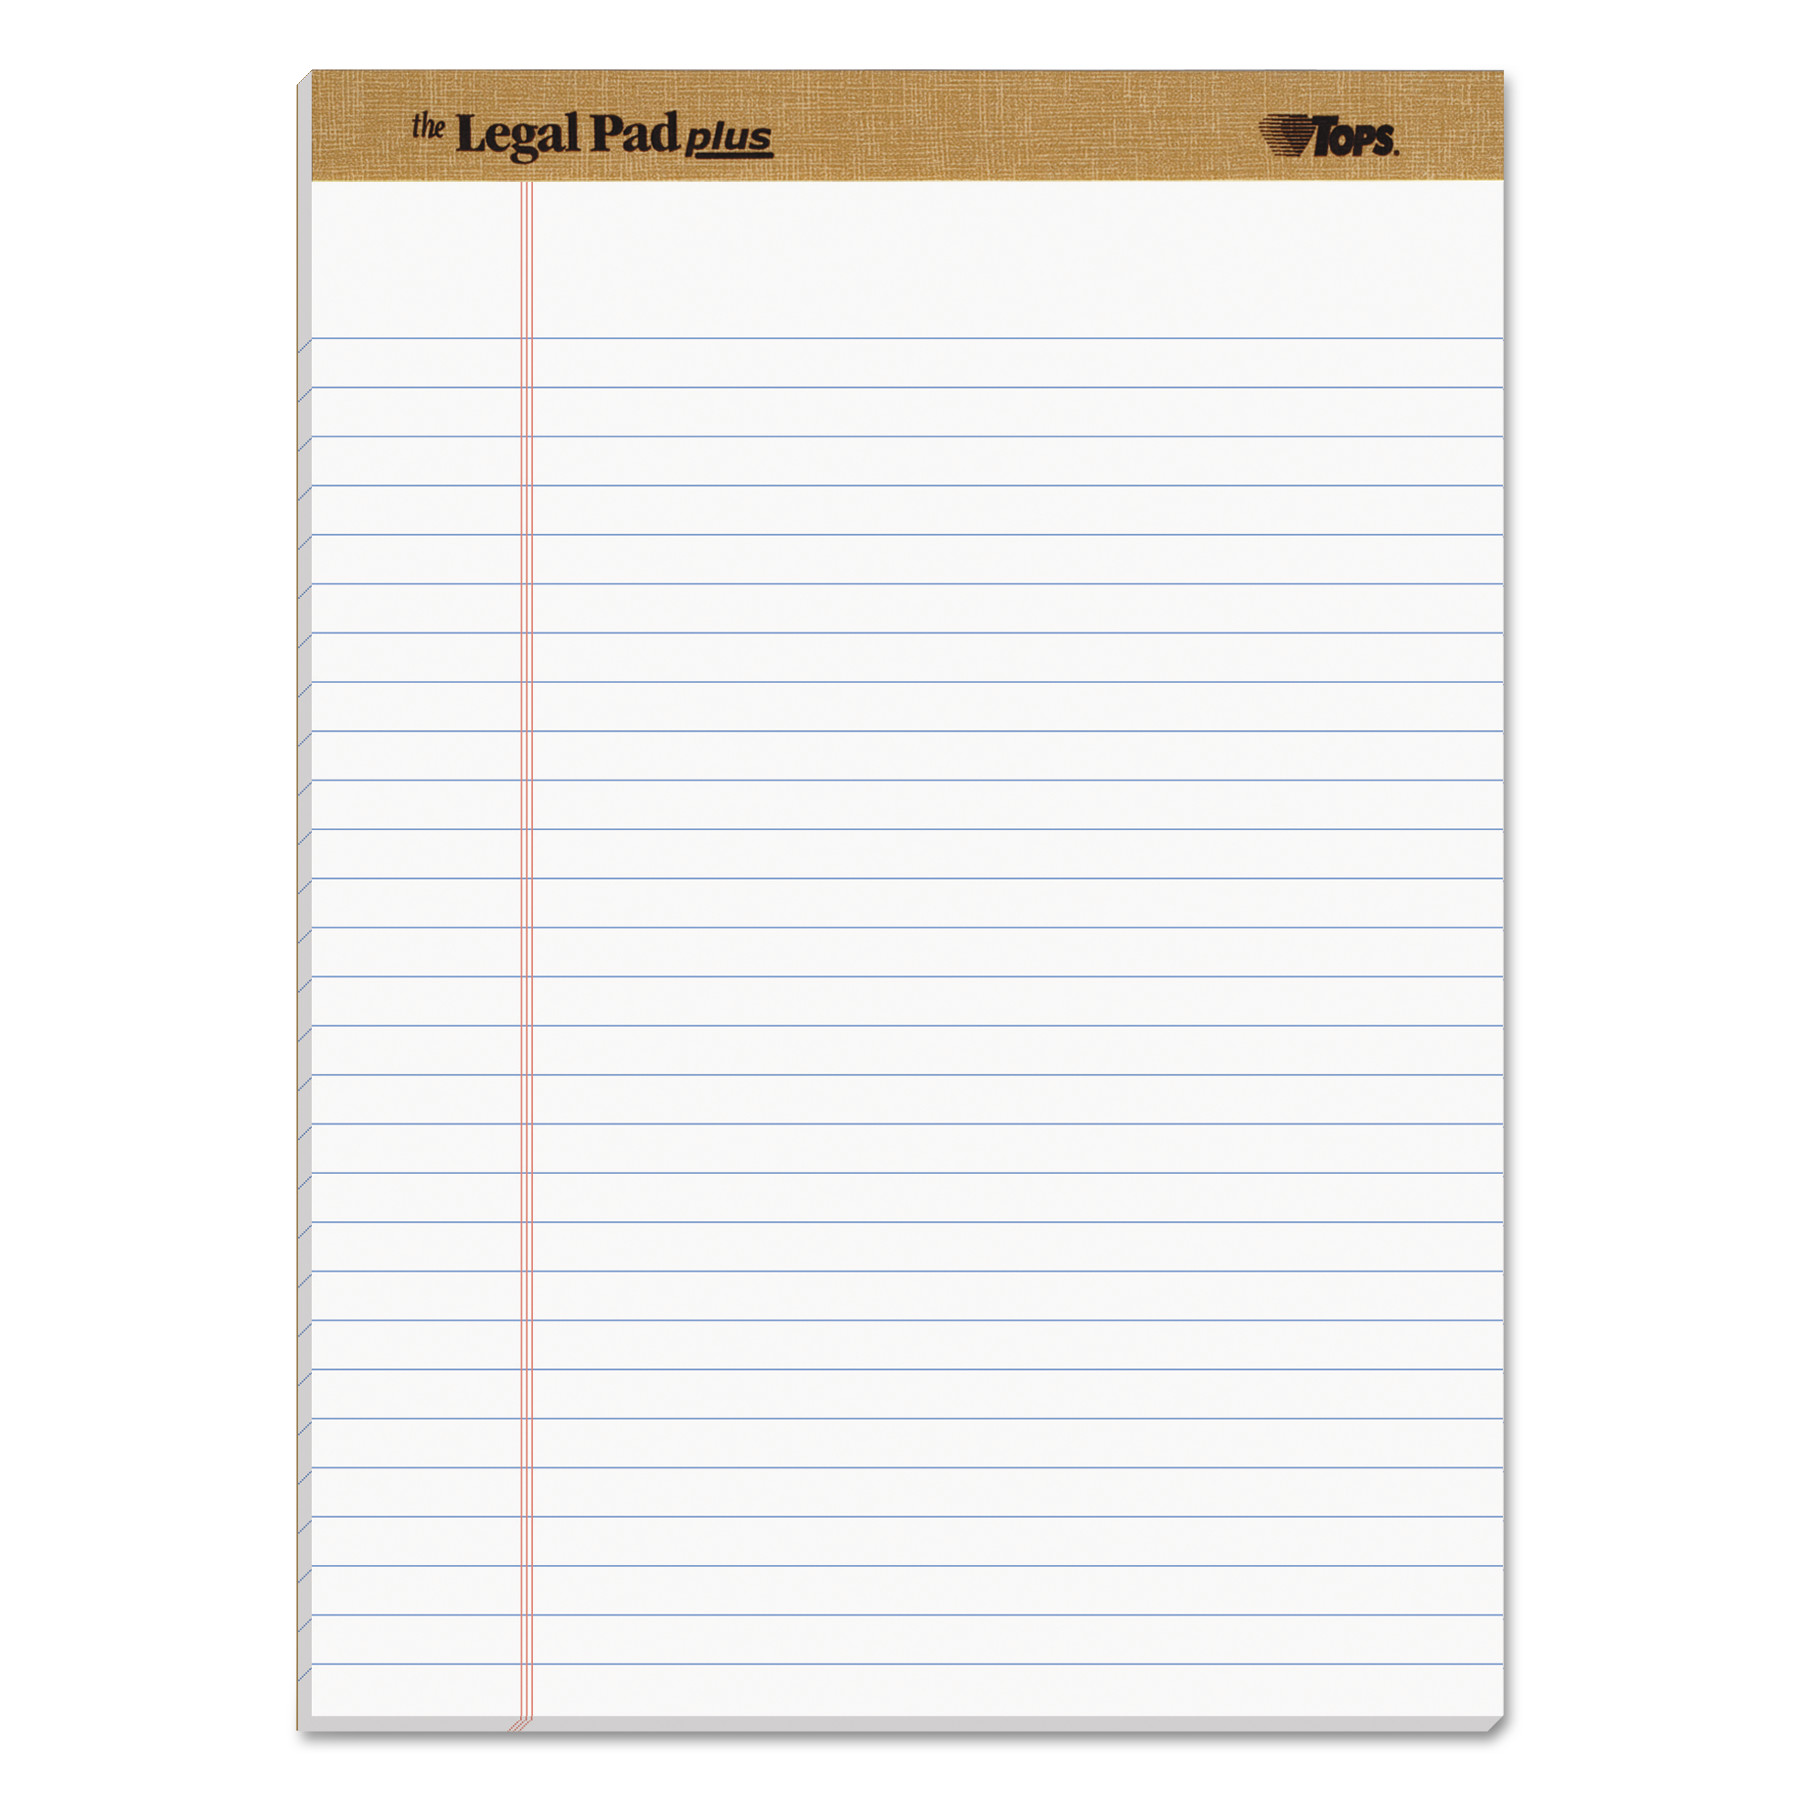  TOPS 71533 The Legal Pad Ruled Pads, Wide/Legal Rule, 8.5 x 11.75, White, 50 Sheets, Dozen (TOP71533) 